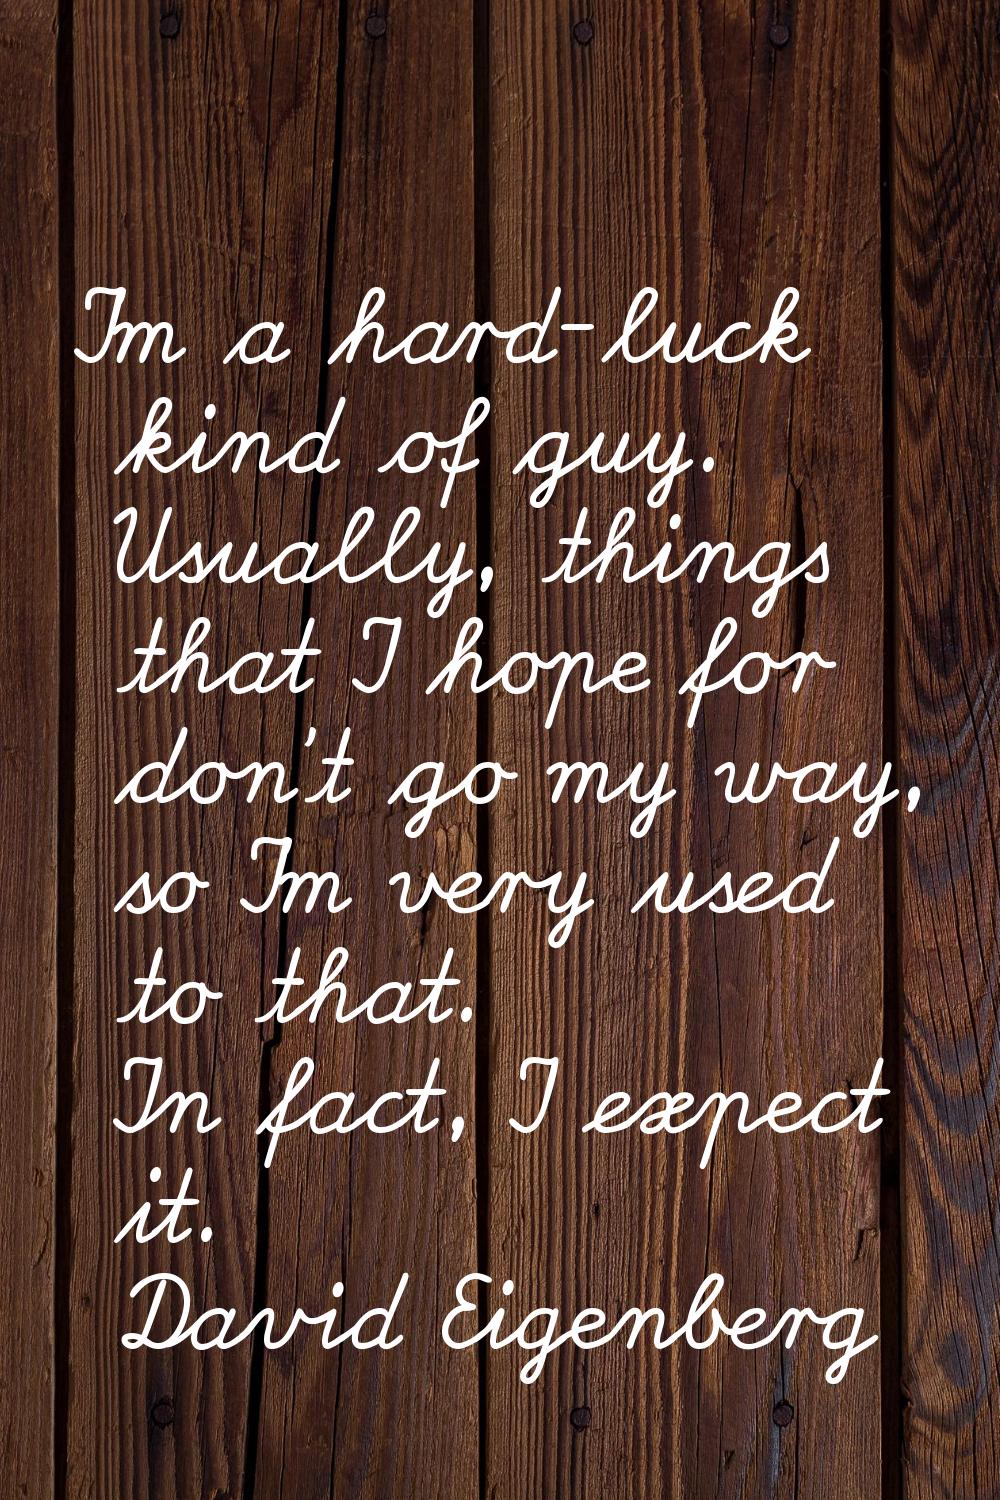 I'm a hard-luck kind of guy. Usually, things that I hope for don't go my way, so I'm very used to t